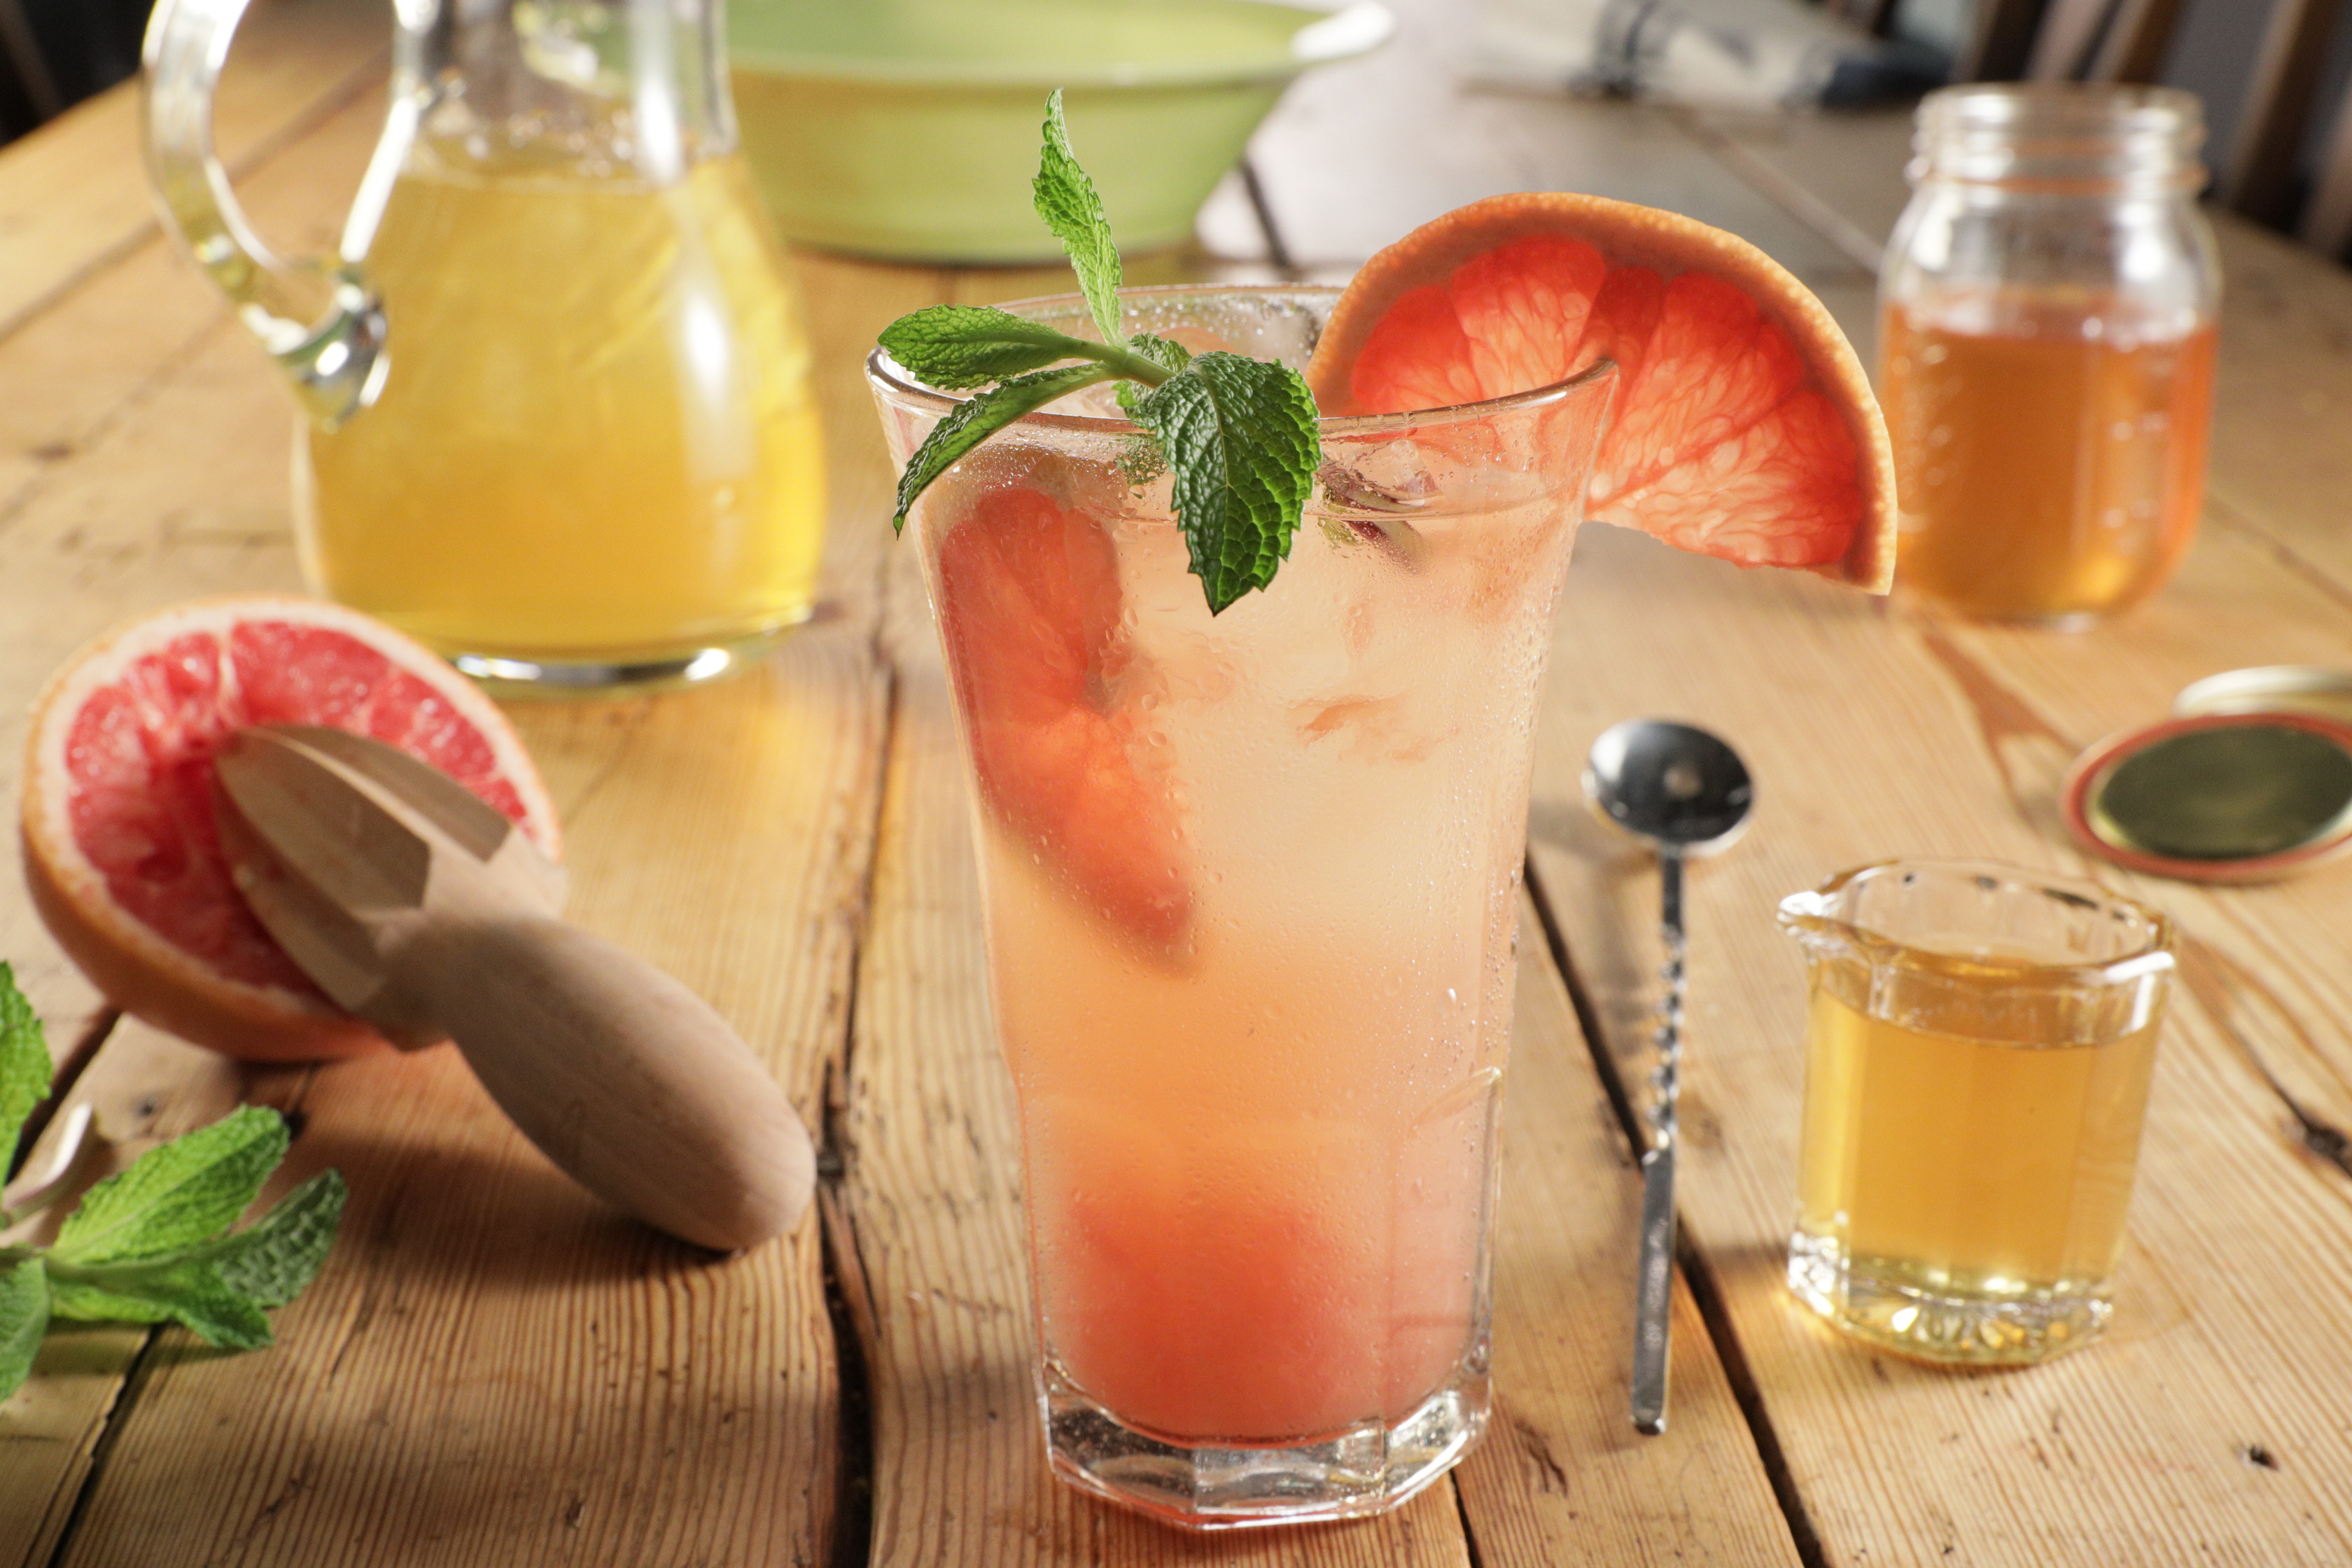 This refreshing iced tea is made with green tea, fresh squeezed pink grapefruit juice, and elderflower-infused syrup. Perfectly wonderful for your watch party!